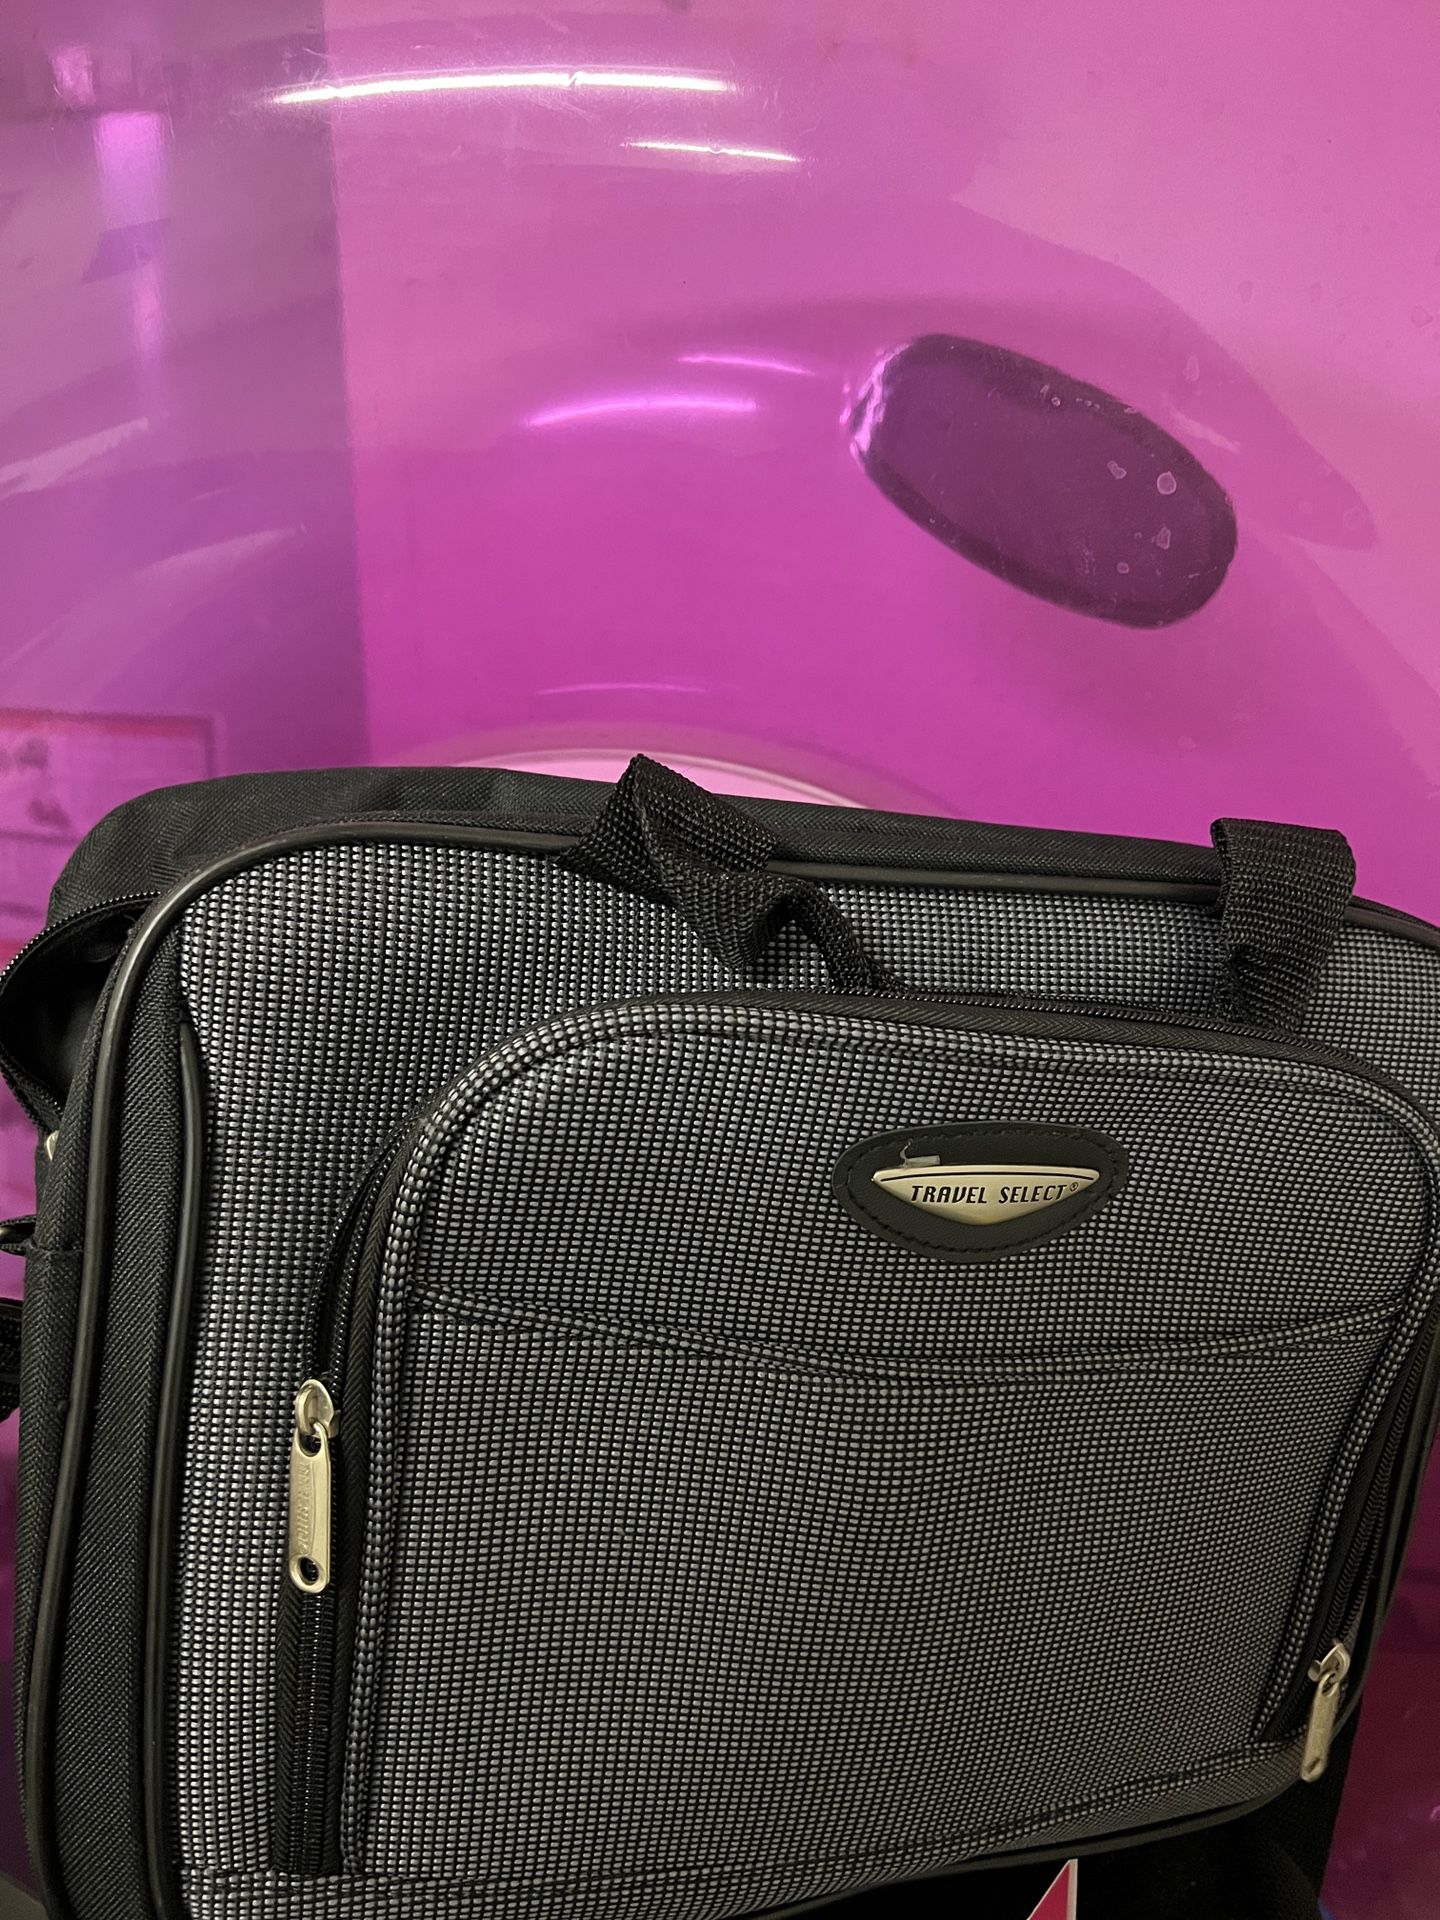 Small Laptop Bag Only $5